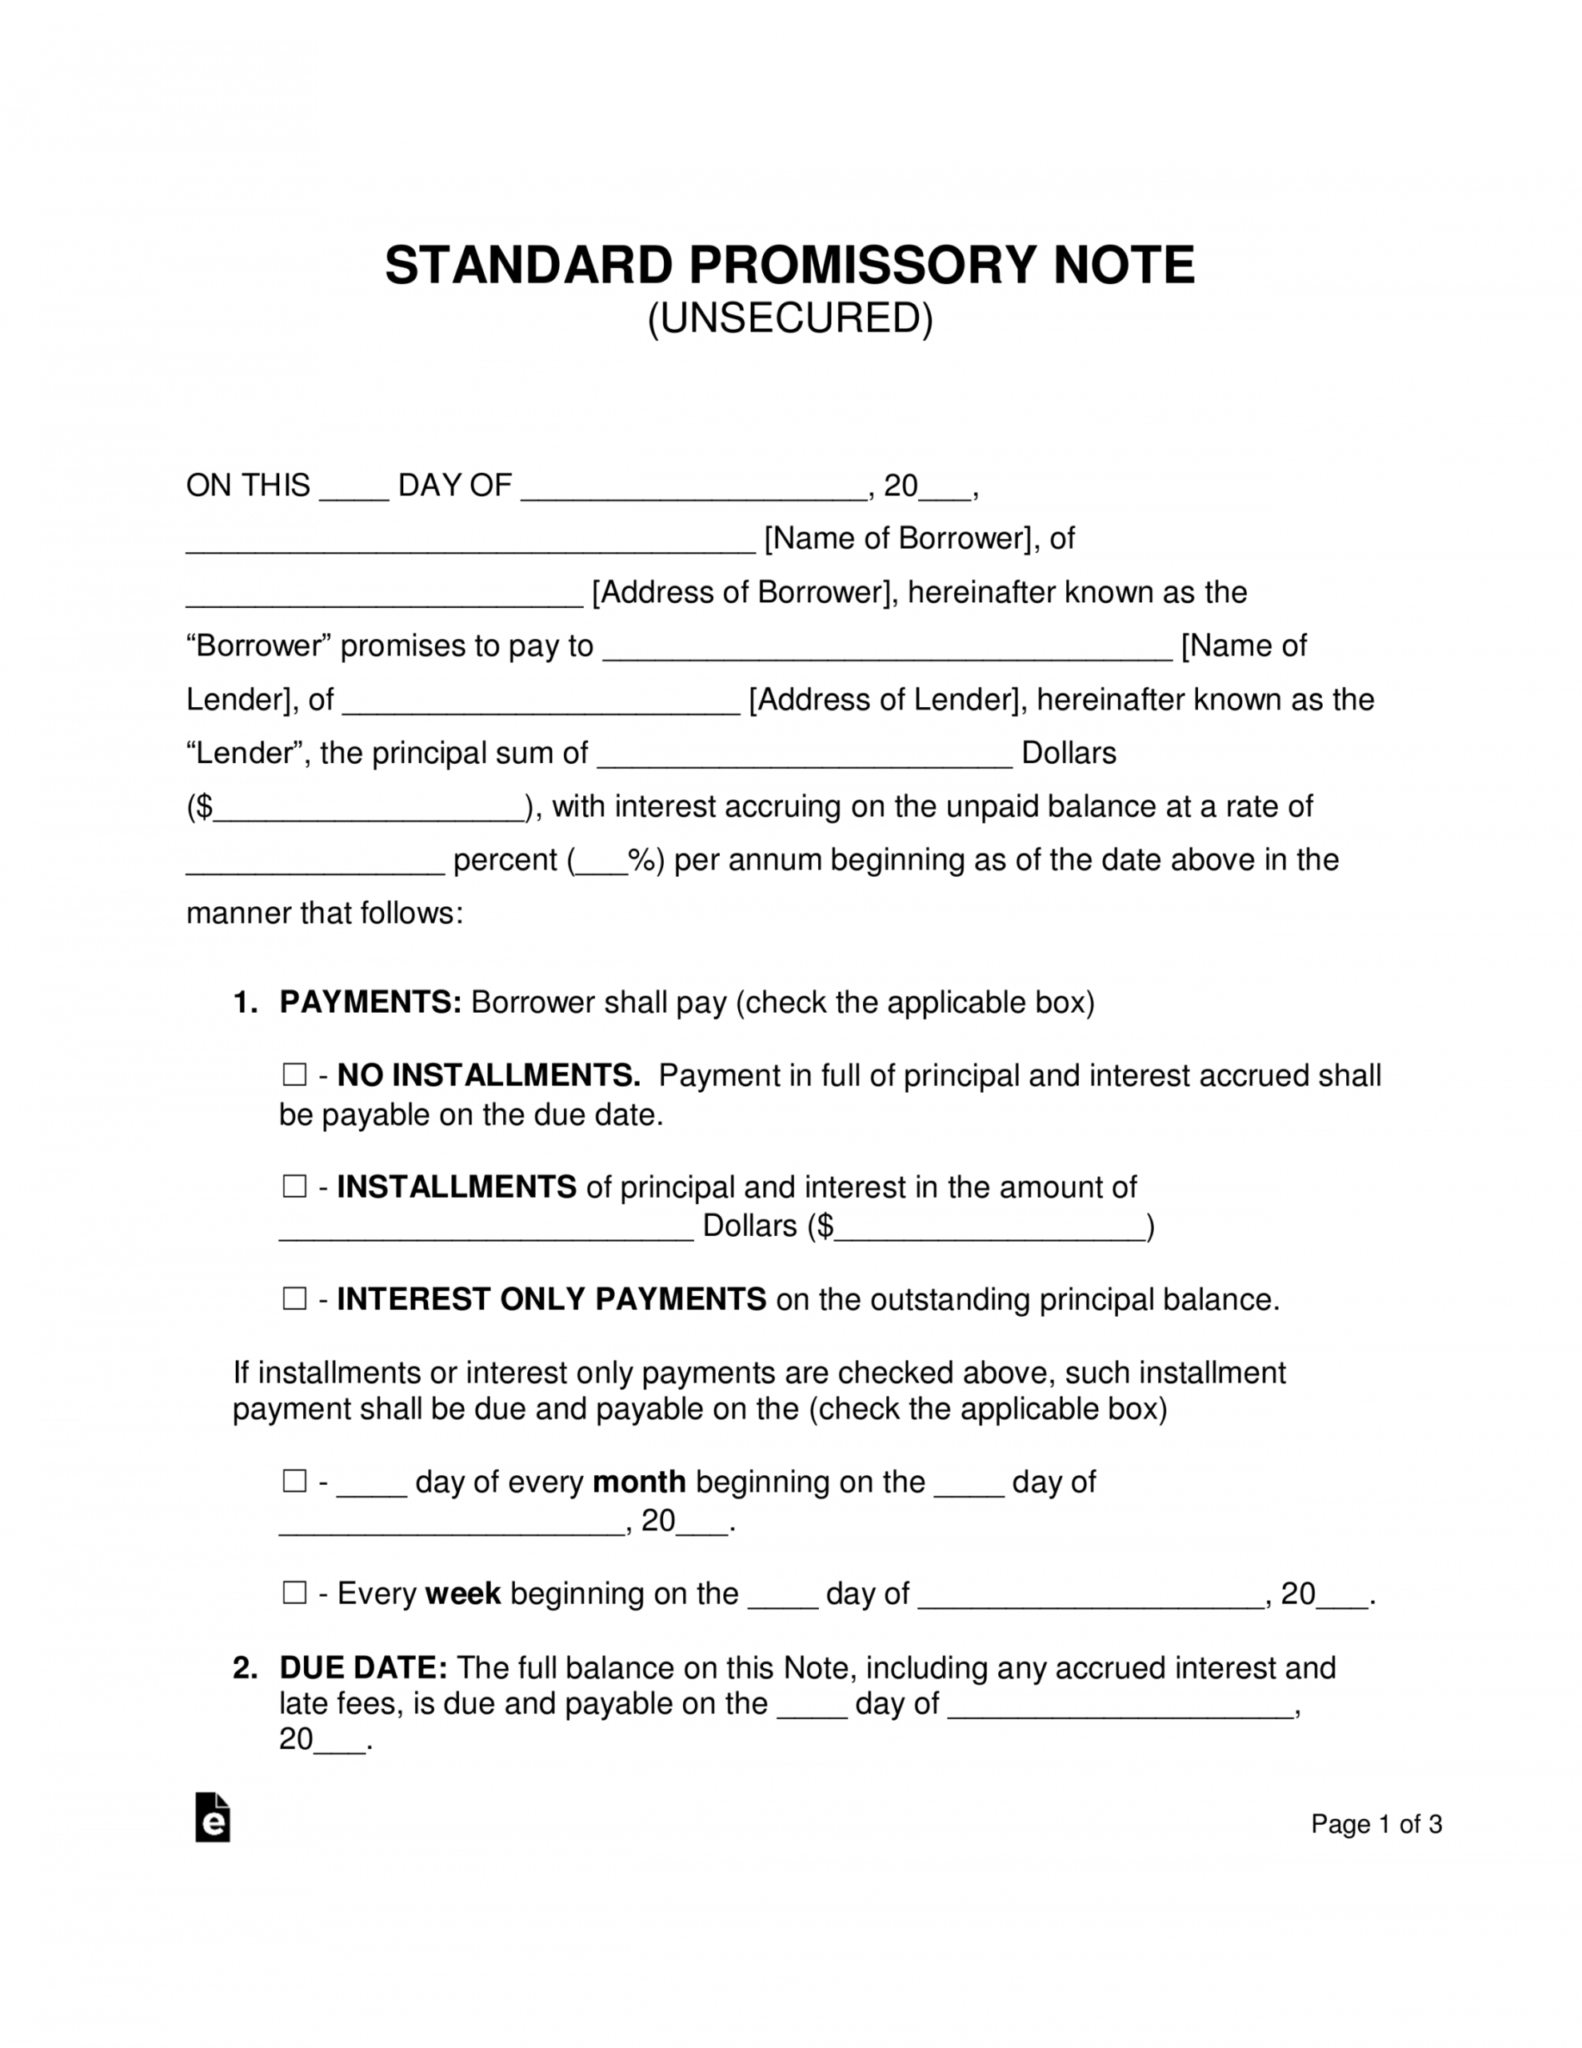 printable-free-unsecured-promissory-note-template-word-pdf-unsecured-promissory-note-template